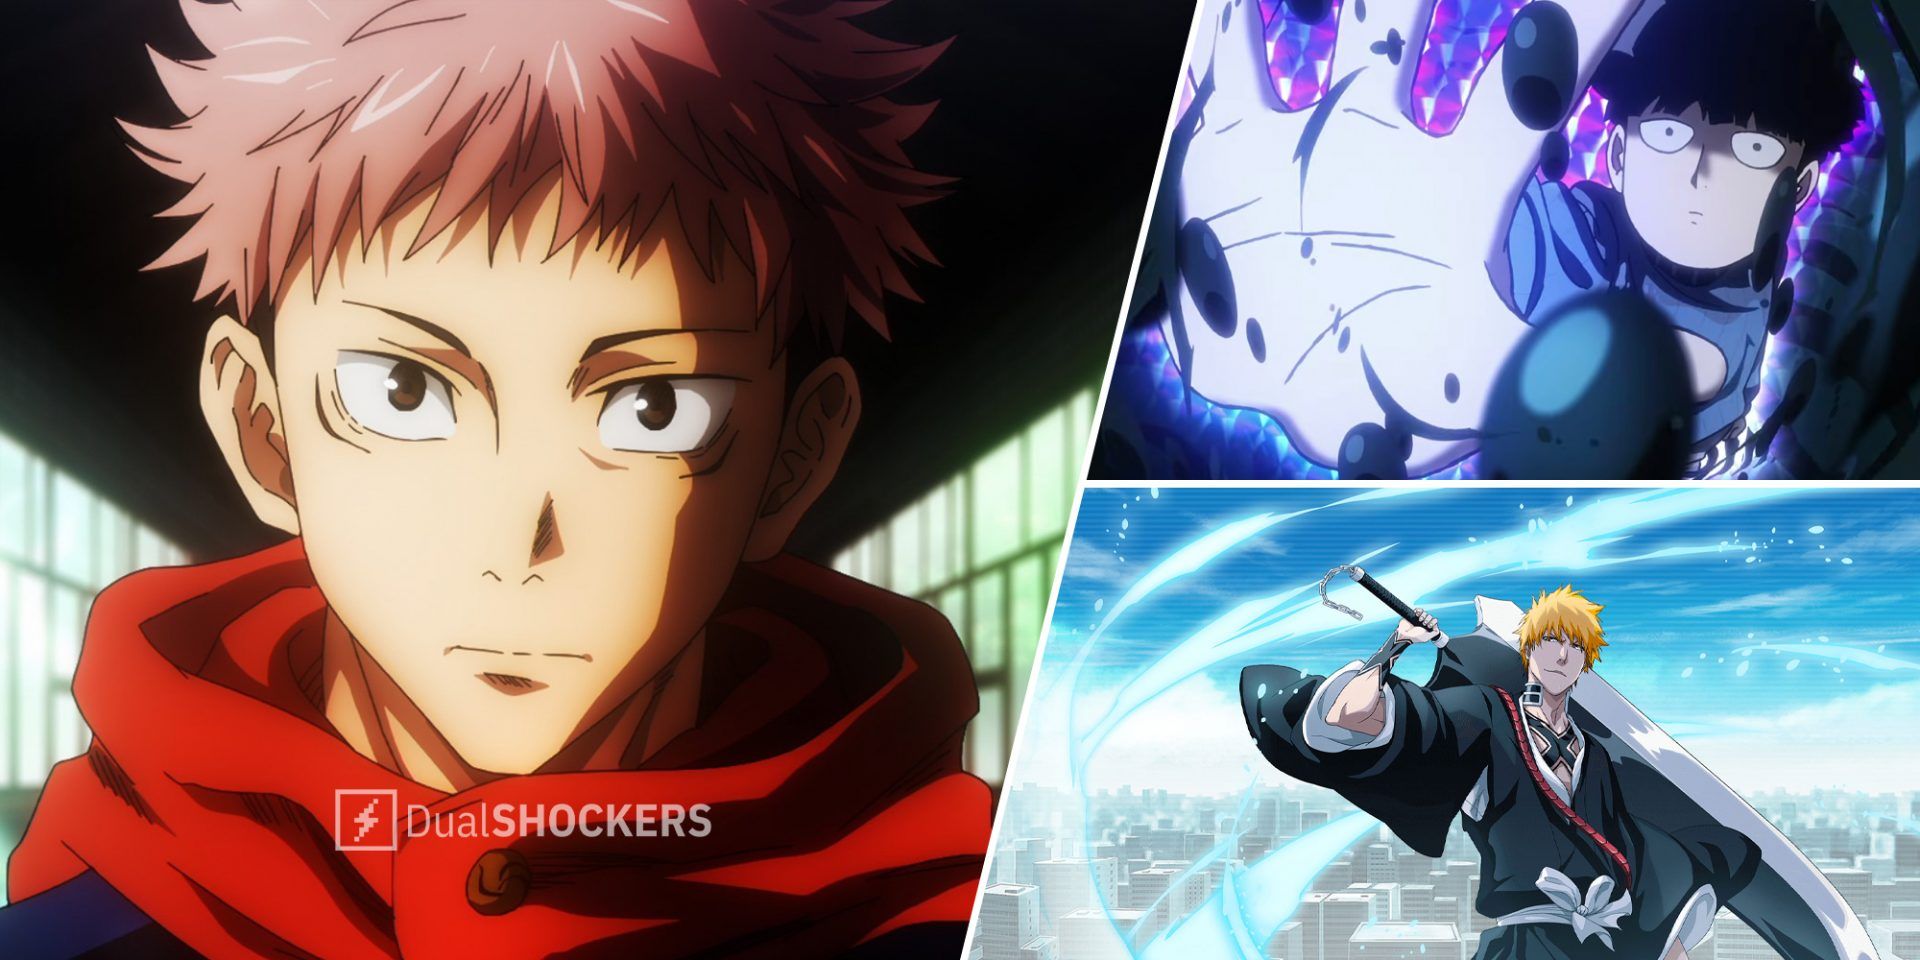 Upcoming Anime Projects That Are As Big As Demon Slayer And Attack On Titan